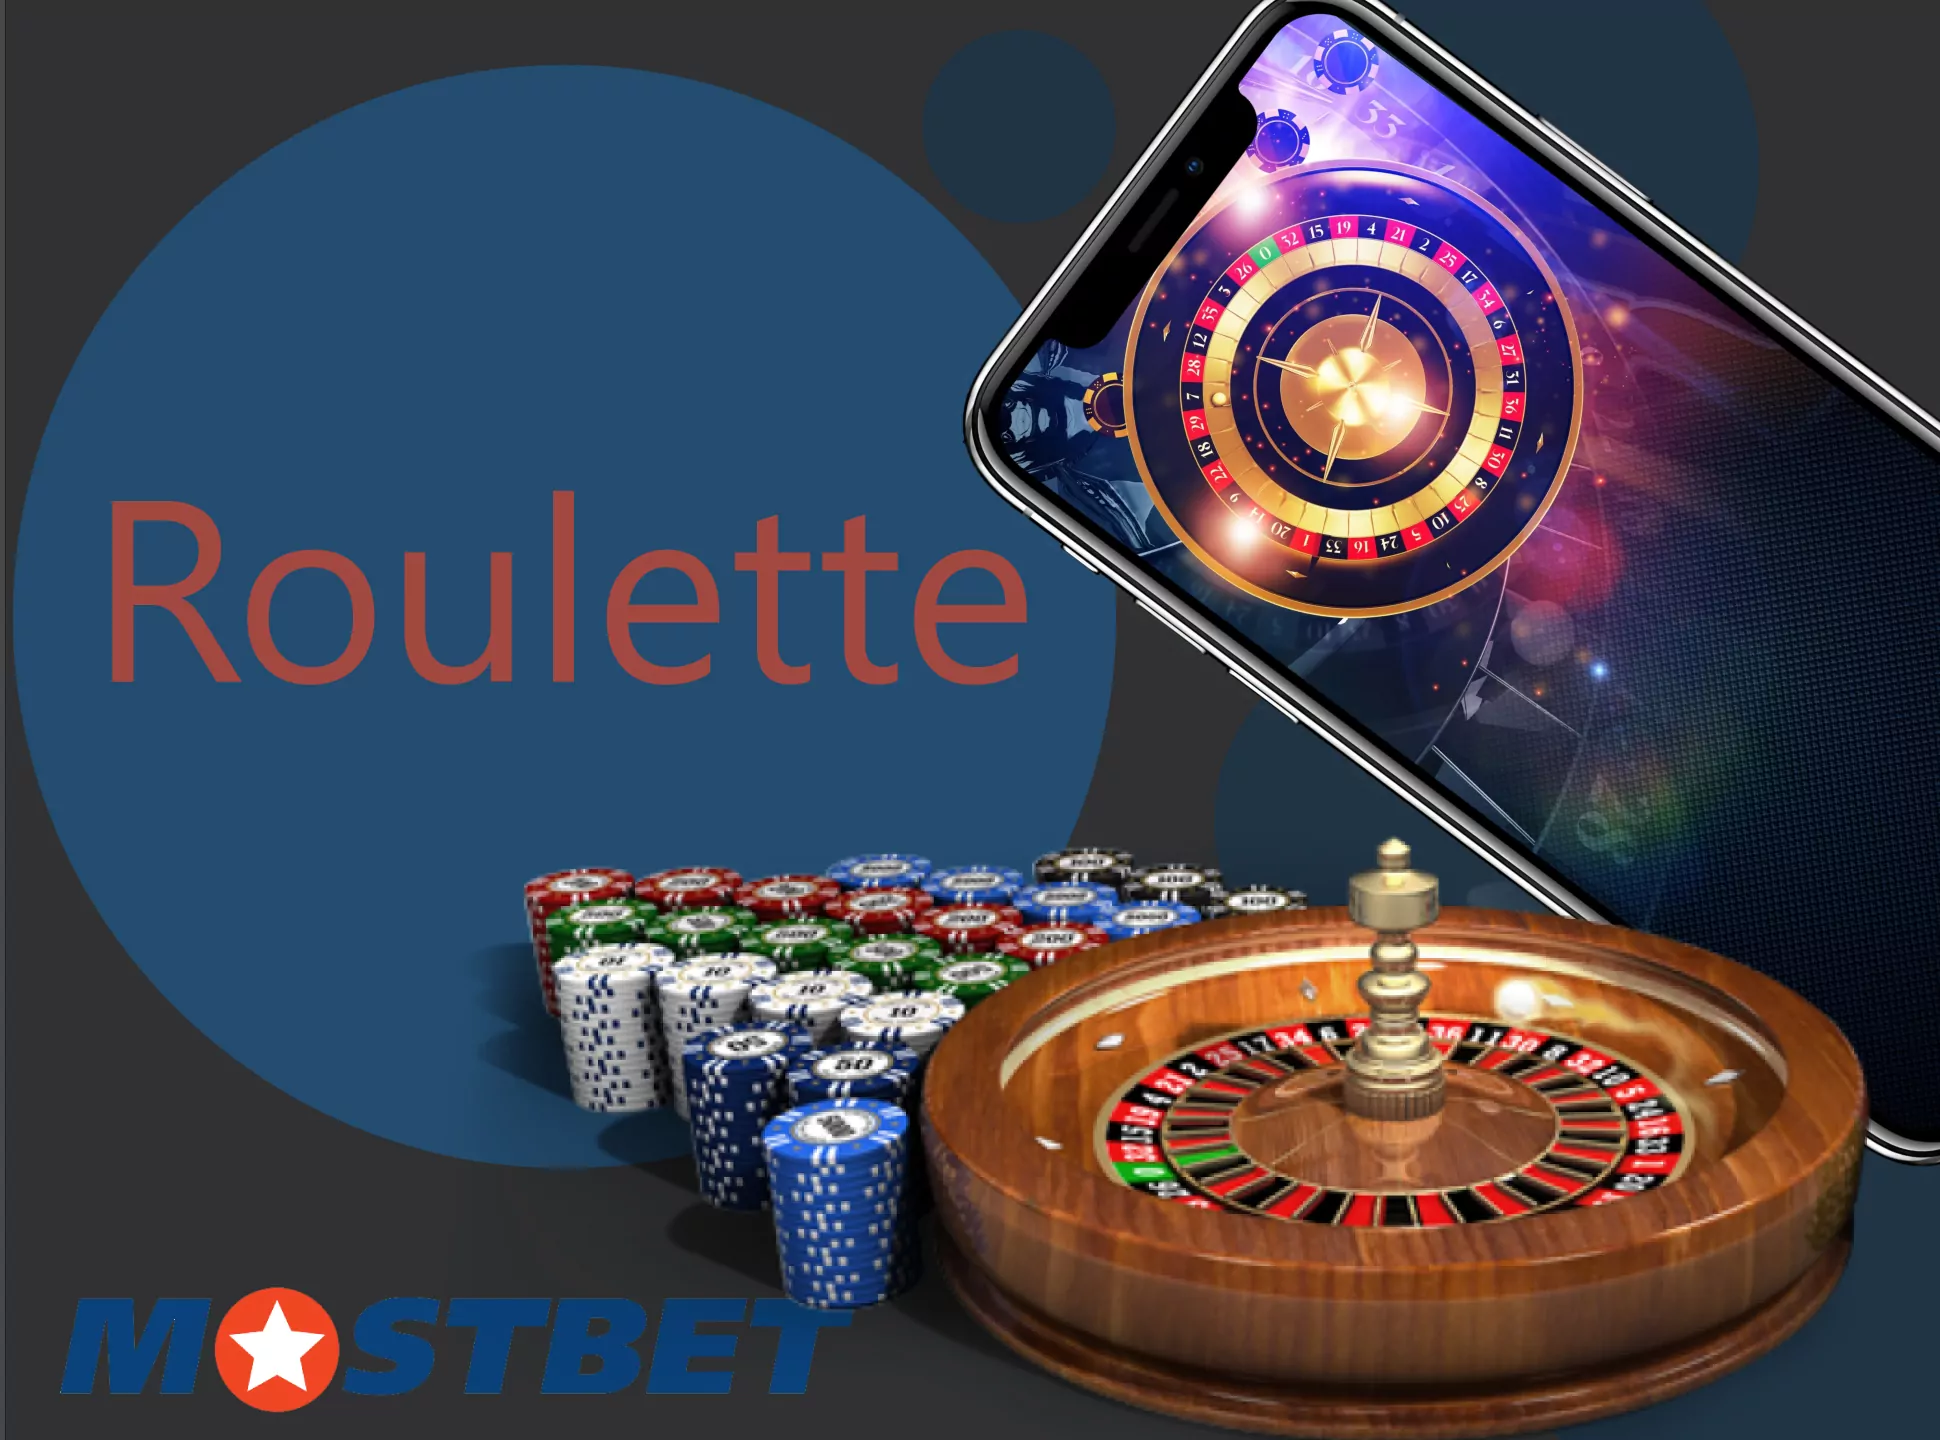 Play the live roulette in the Mostbet app in Bangladesh.